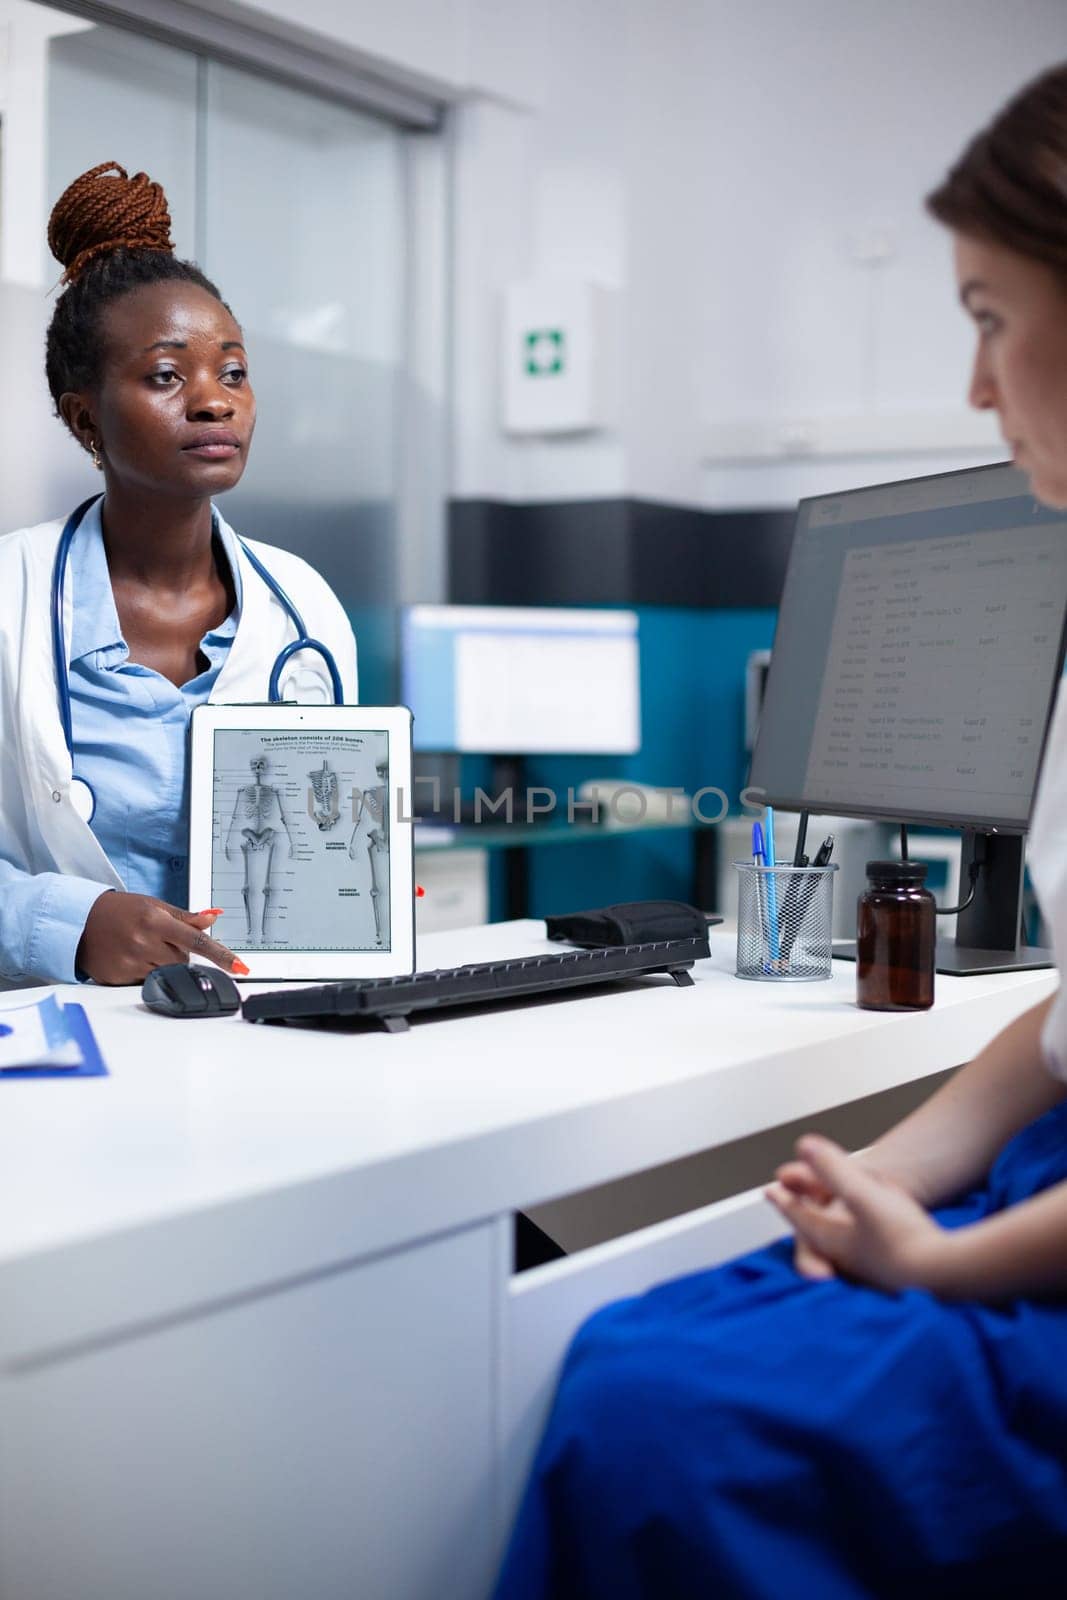 Bone specialist doctor at physical consultation offering anatomy information to patient on tablet using human skeleton figure. Orthopedist providing healthcare diagnosis to woman at appointment